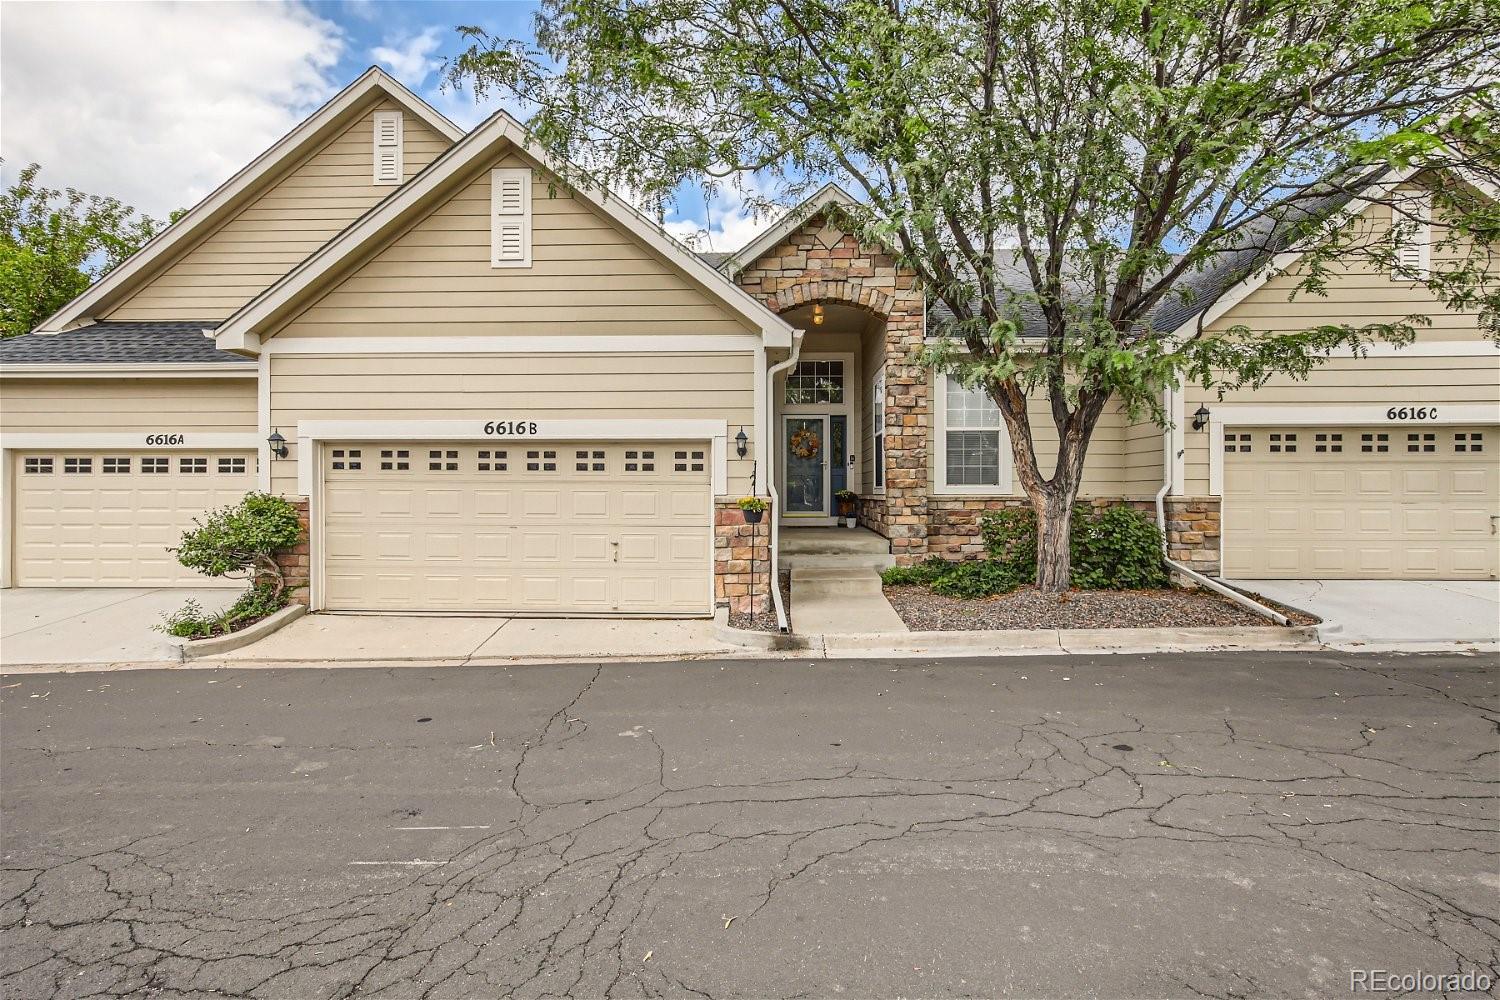 6616 s reed way, littleton sold home. Closed on 2024-04-05 for $572,500.